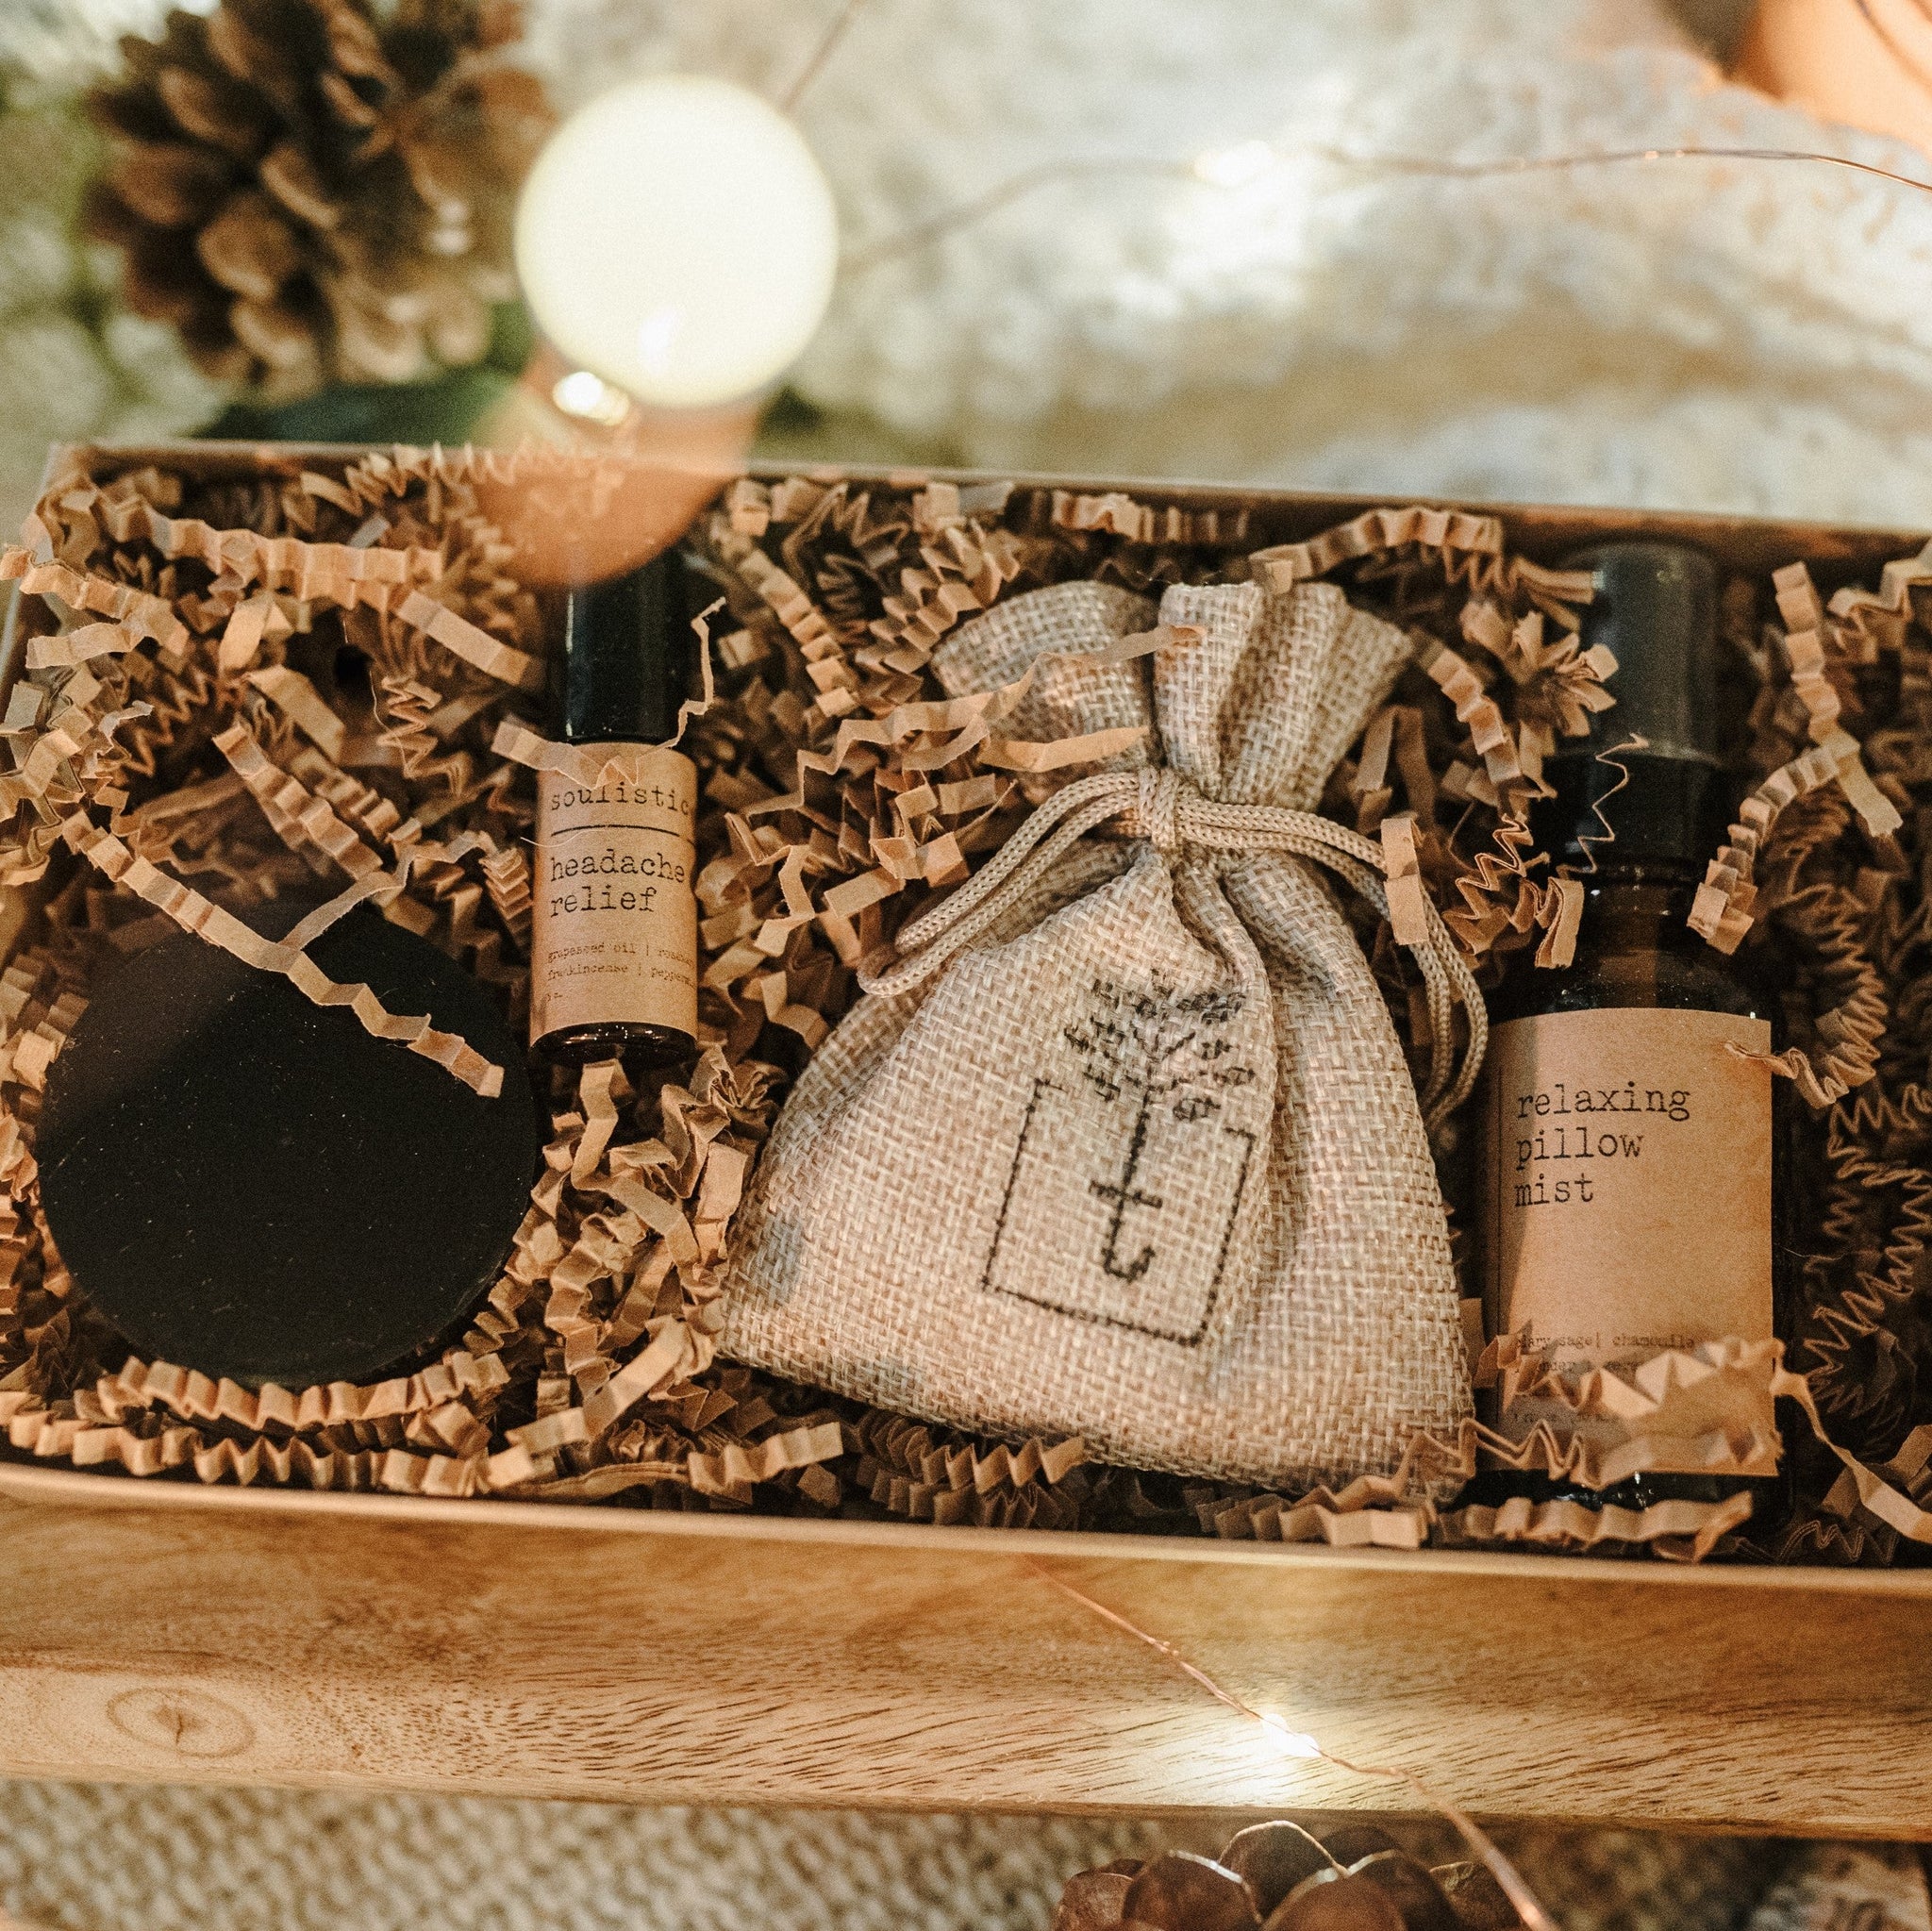 A travel set full of sample sizes already wrapped in a kraft box. The set includes a lavender & chamomile epsom salt bath, essential oil headache relief roller, organic herbal oatmeal bath soak & a relaxing pillow spray. The set is on a piece of wood and blanket with pine cones and lights in the background.